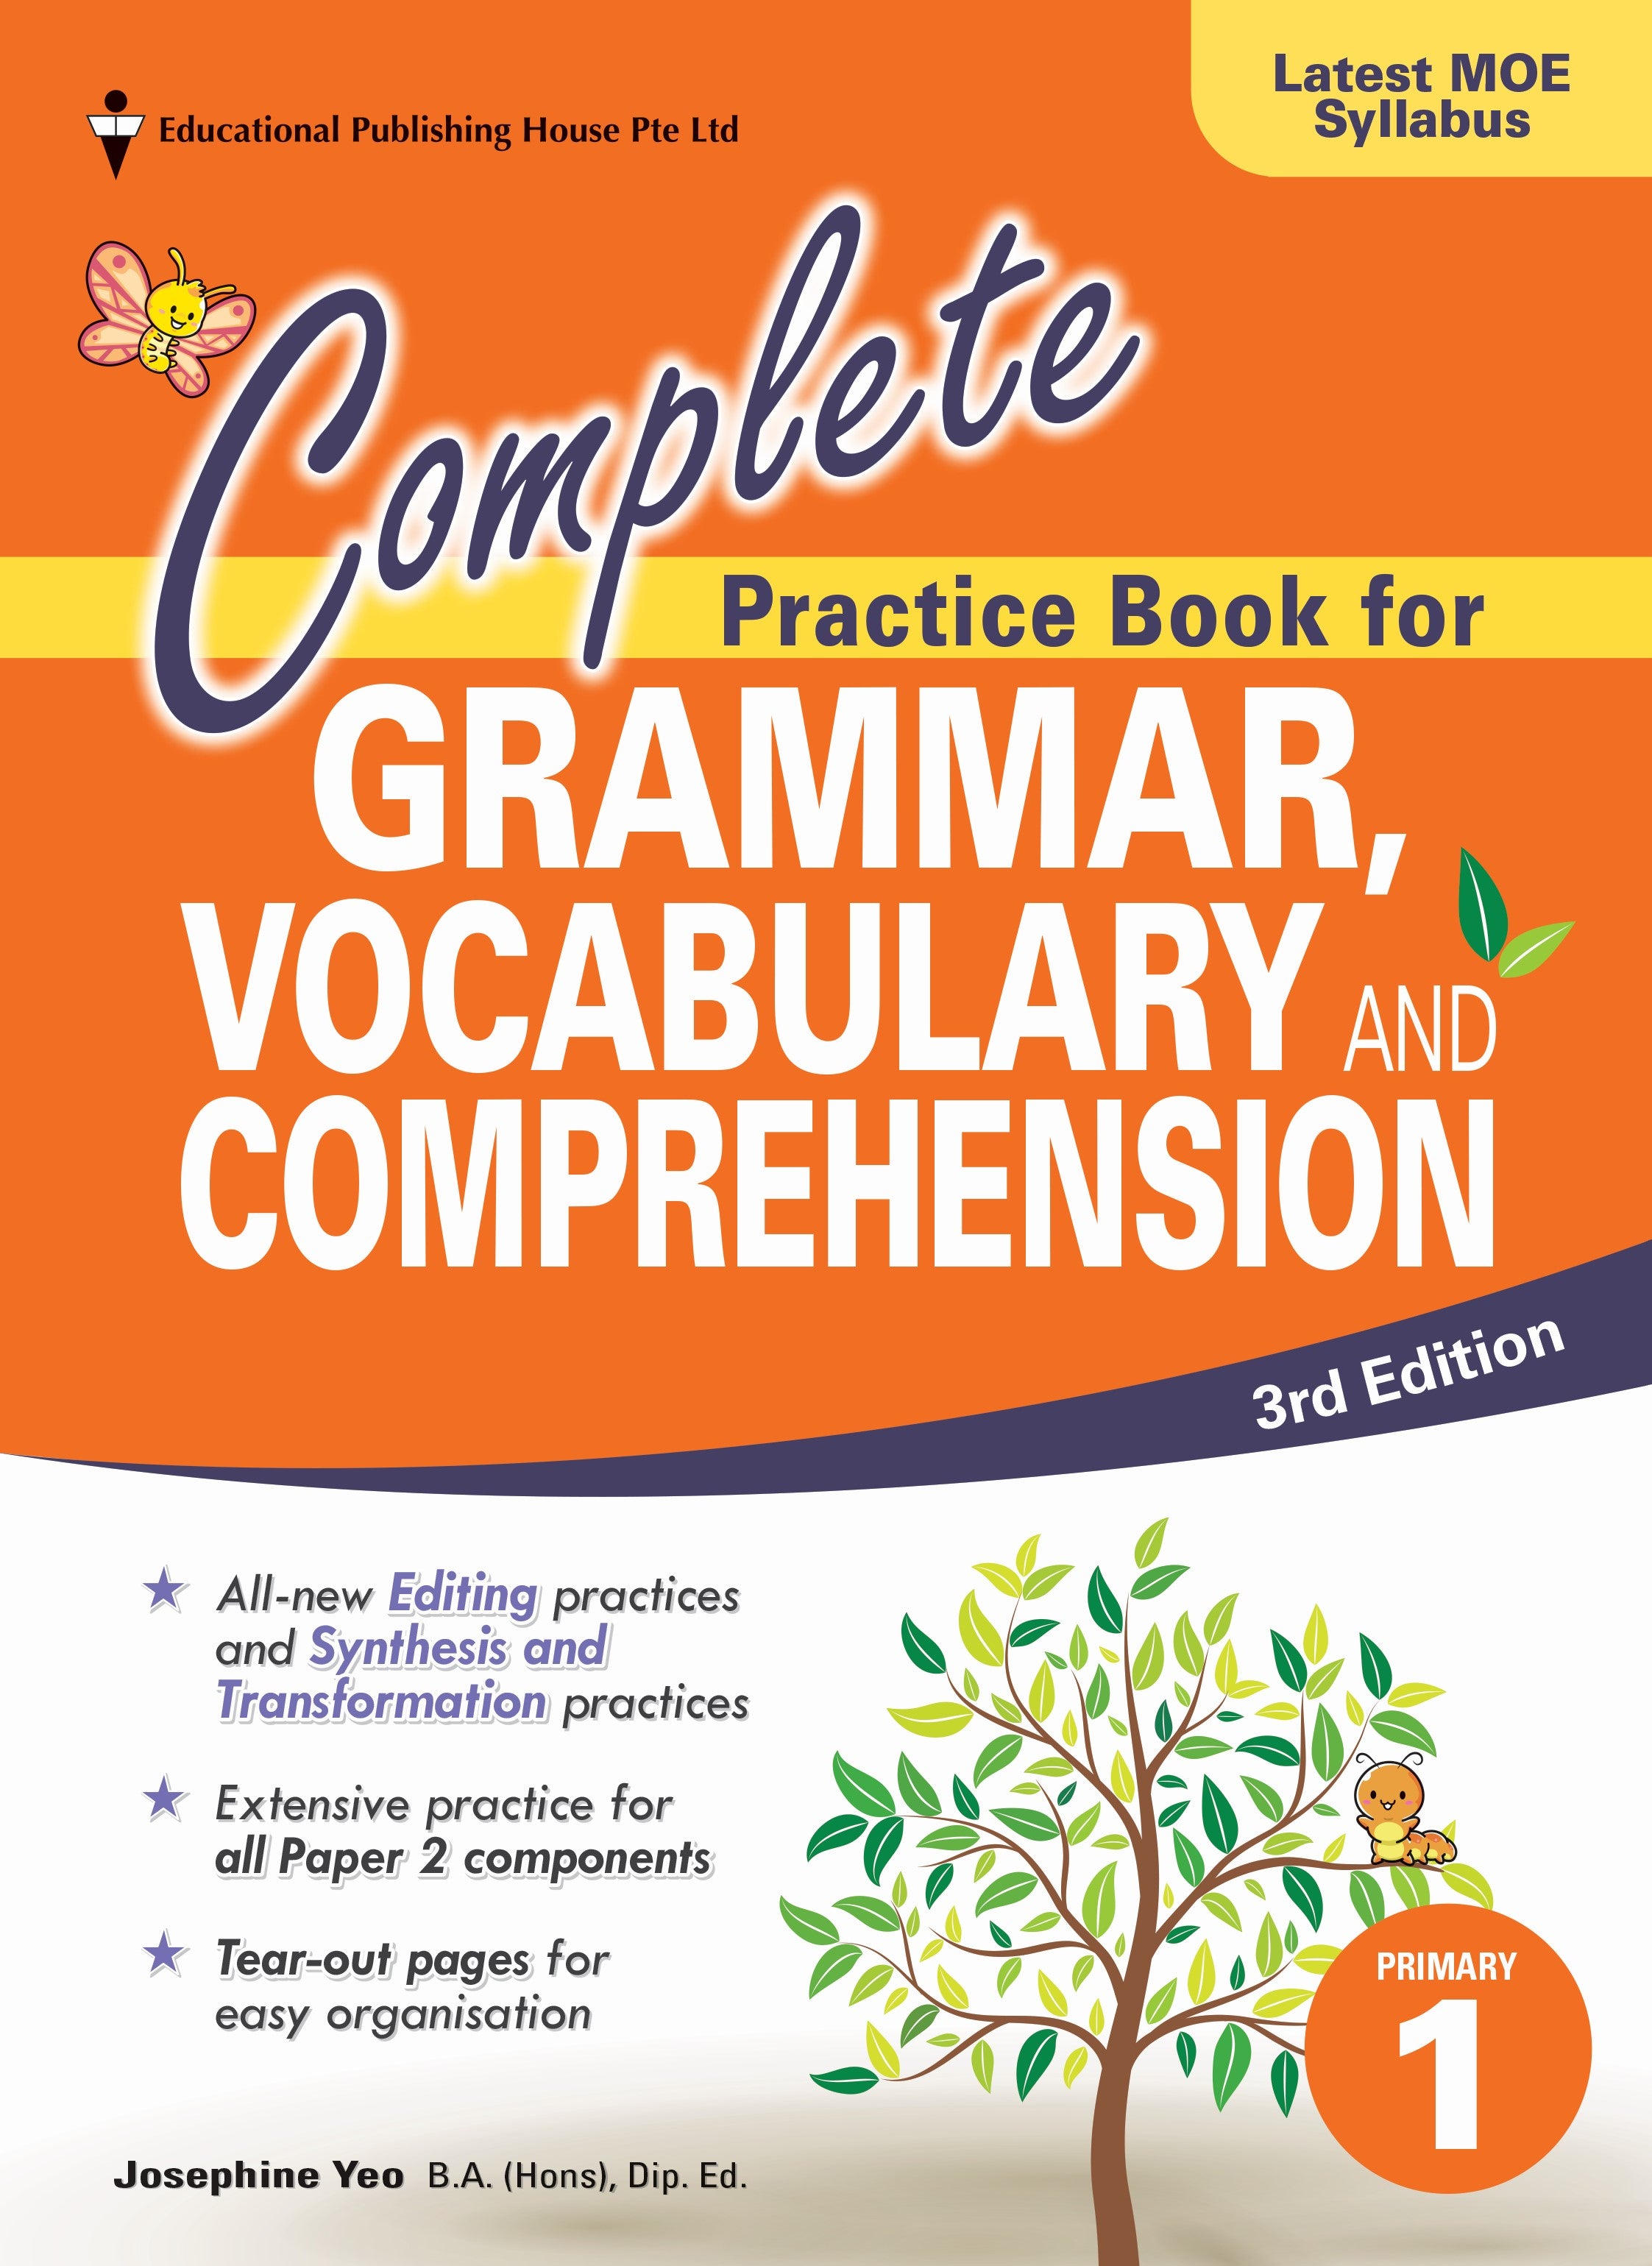 Primary 1 Complete Practice Book for Grammar, Vocabulary & Comprehension (3ED) - _MS, assessment, Assessment Books, EDUCATIONAL PUBLISHING HOUSE, ENGLISH, INTERMEDIATE, PRIMARY 1